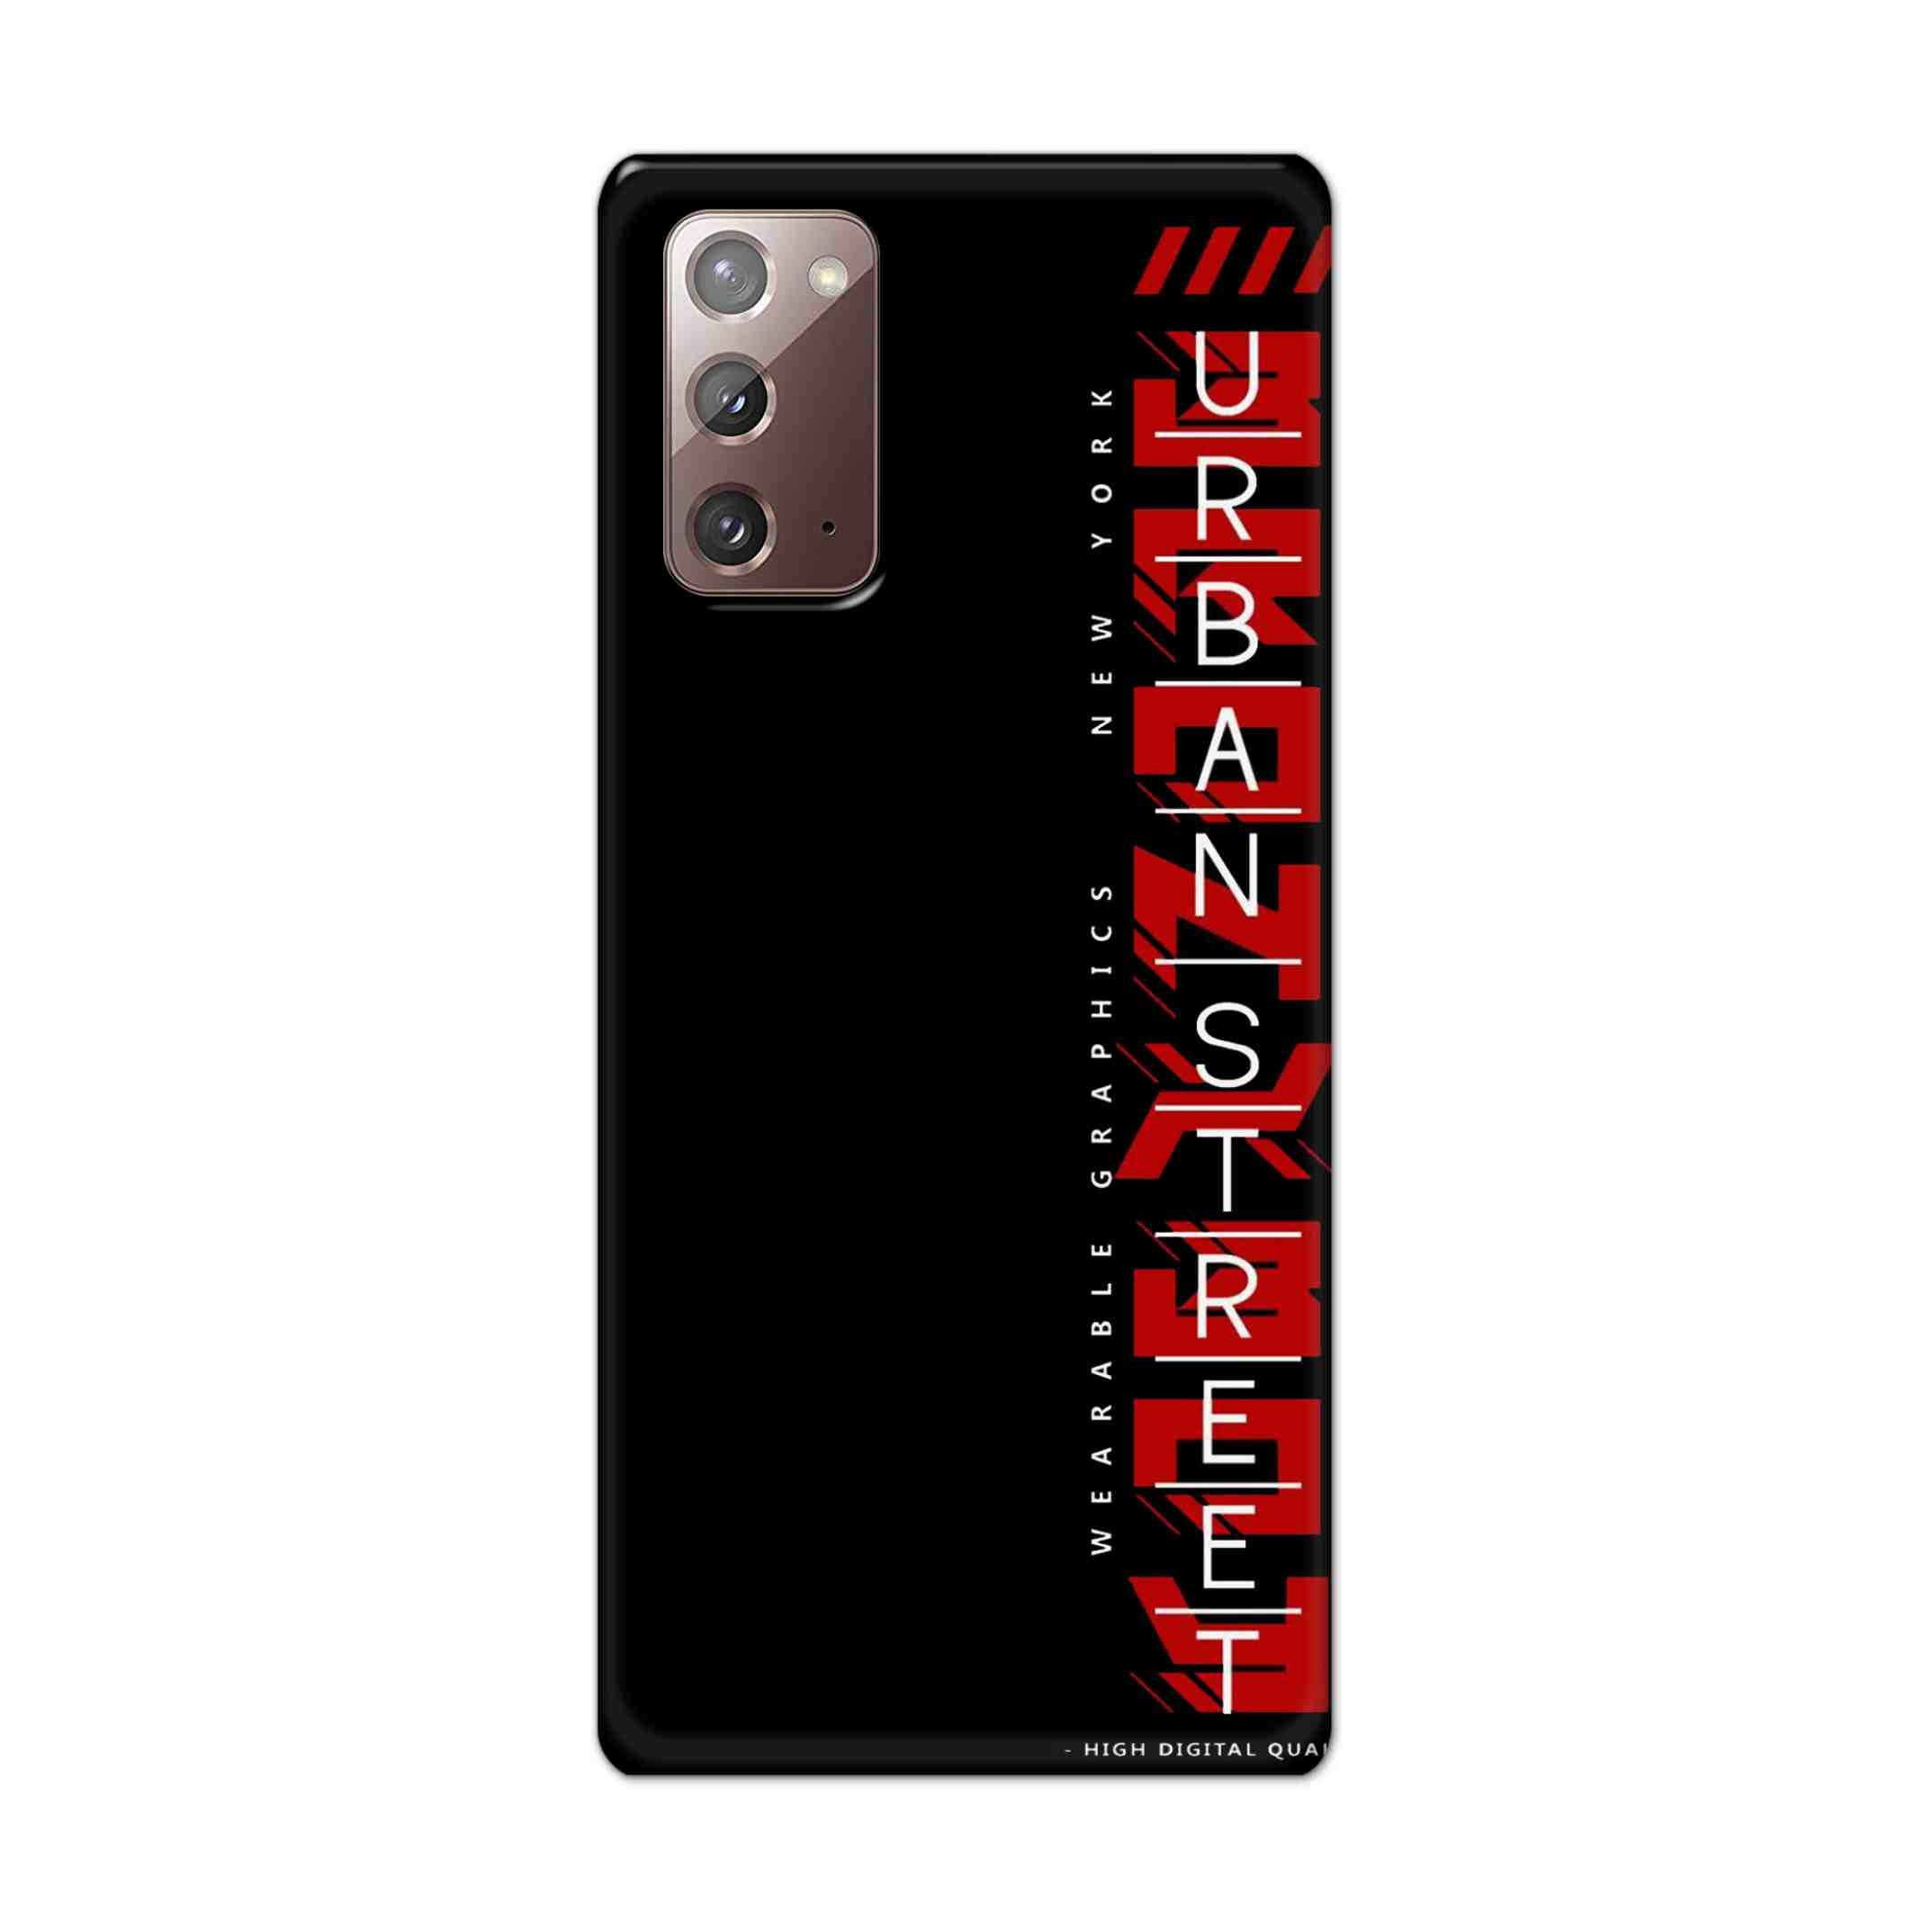 Buy Urban Street Hard Back Mobile Phone Case Cover For Samsung Galaxy Note 20 Online